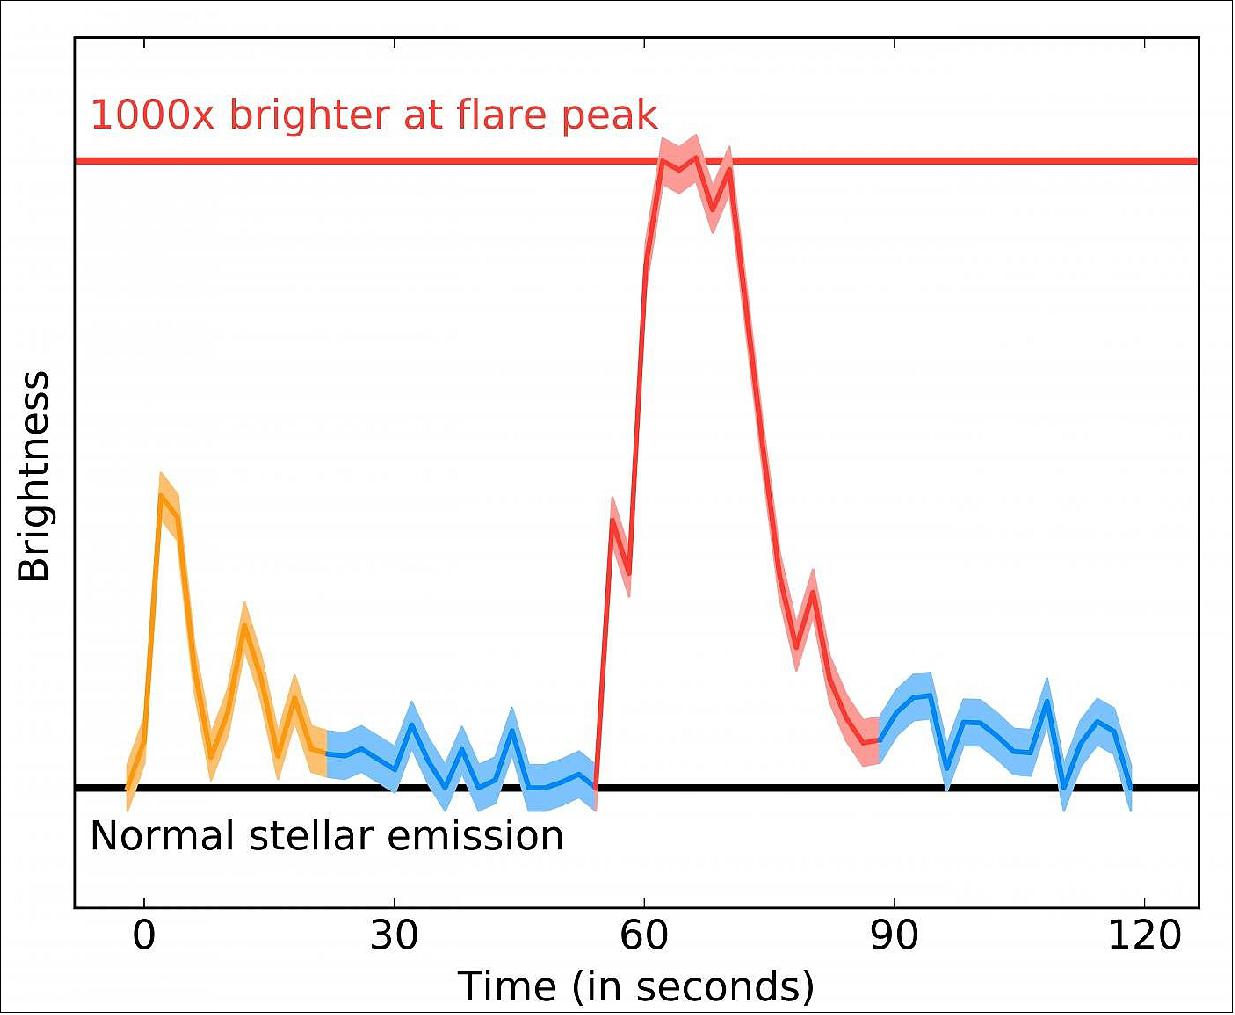 Figure 24: The brightness of Proxima Centauri as observed by ALMA over the two minutes of the event on March 24, 2017. The massive stellar flare is shown in red, with the smaller earlier flare in orange, and the enhanced emission surrounding the flare that could mimic a disk in blue. At its peak, the flare increased Proxima Centauri's brightness by 1,000 times. The shaded area represents uncertainty (image credit: Meredith MacGregor)